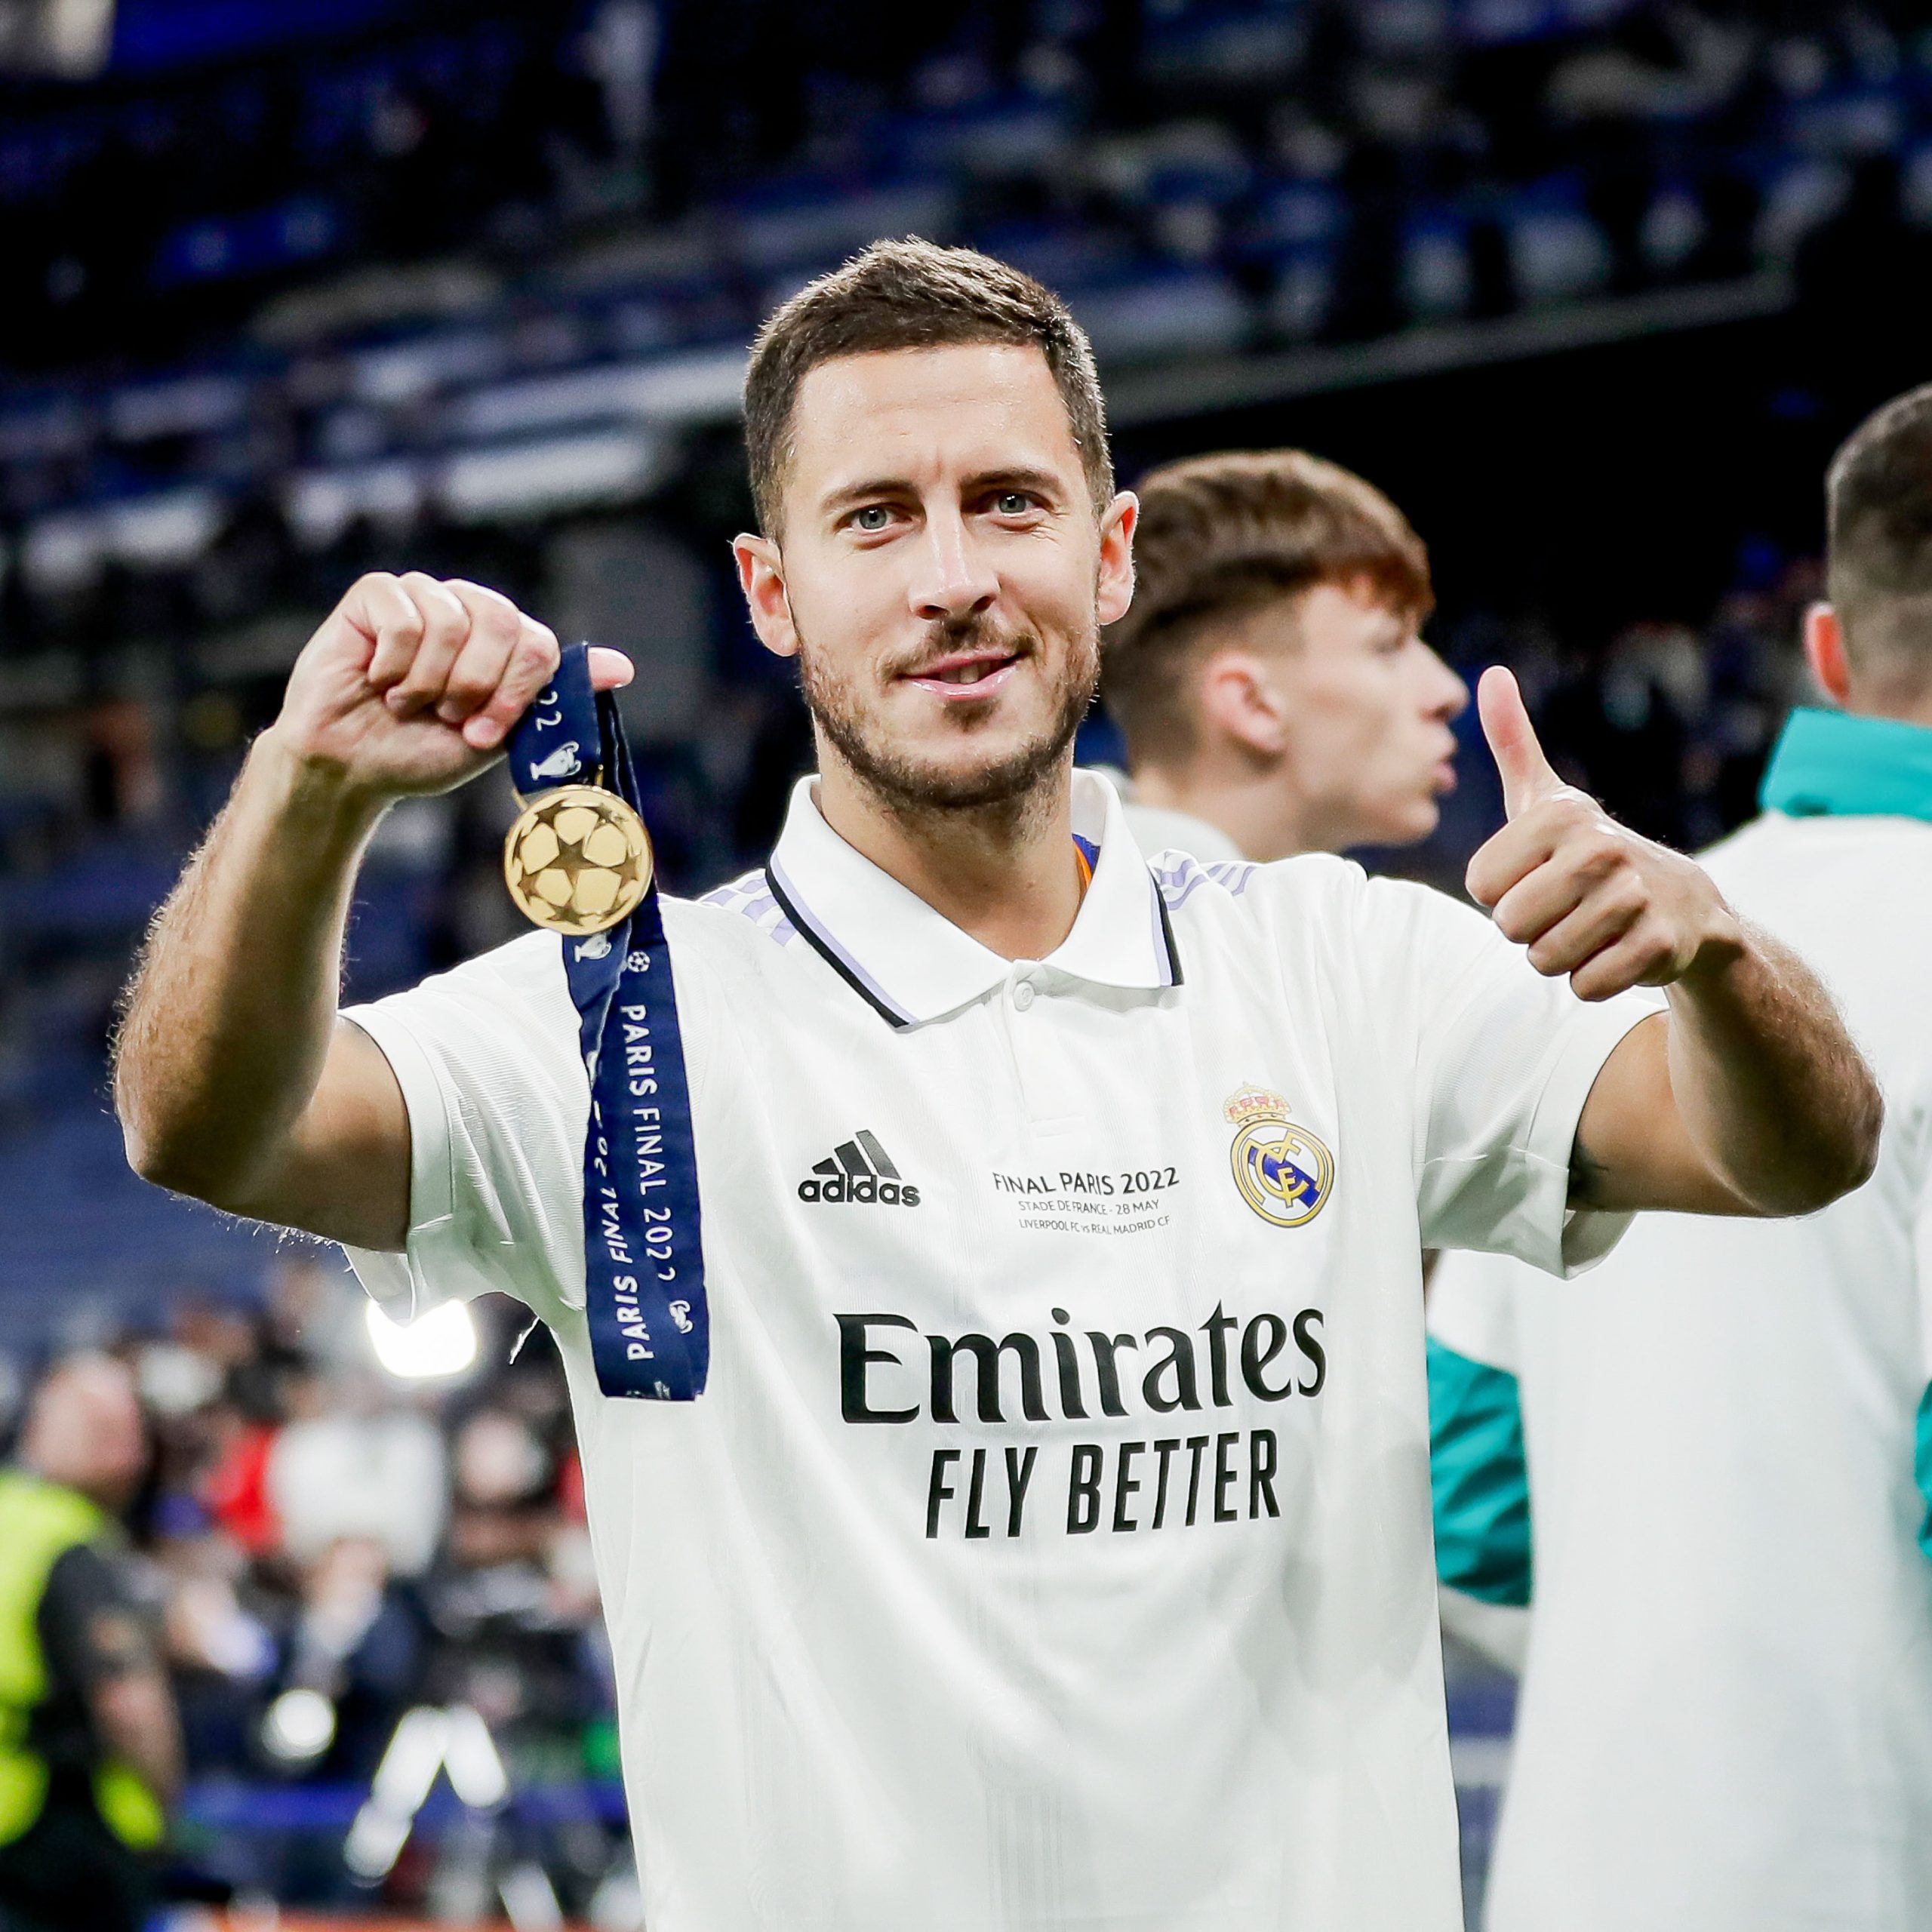 Eden Hazard with the Champions League winners medal. (Credit: Twitter)